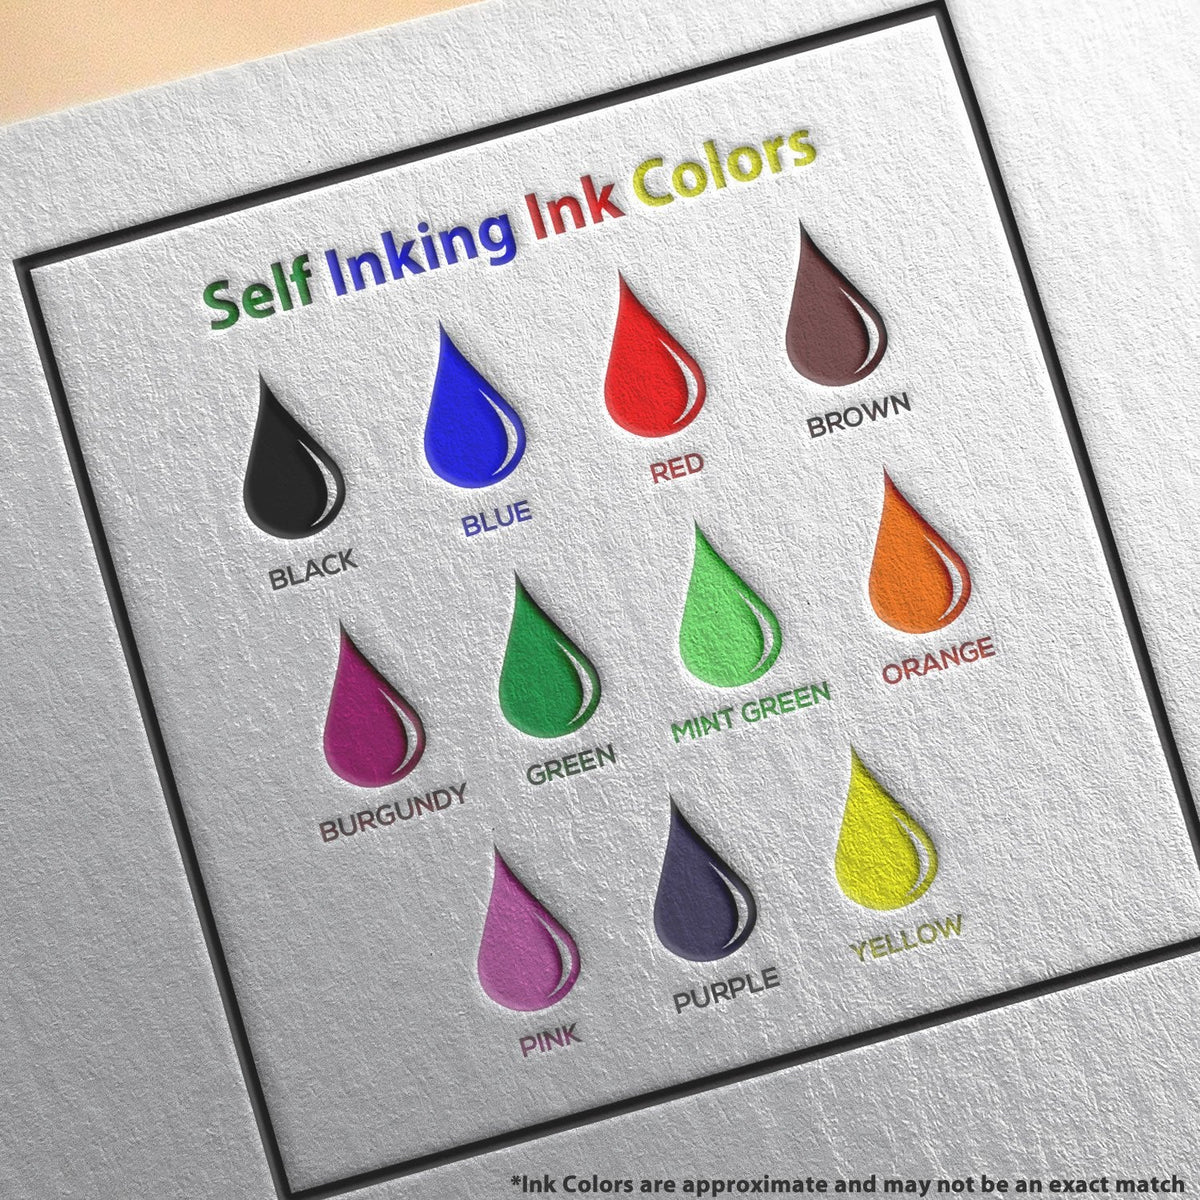 Self-Inking Narrow Font Return Receipt Requested Stamp Ink Color Options